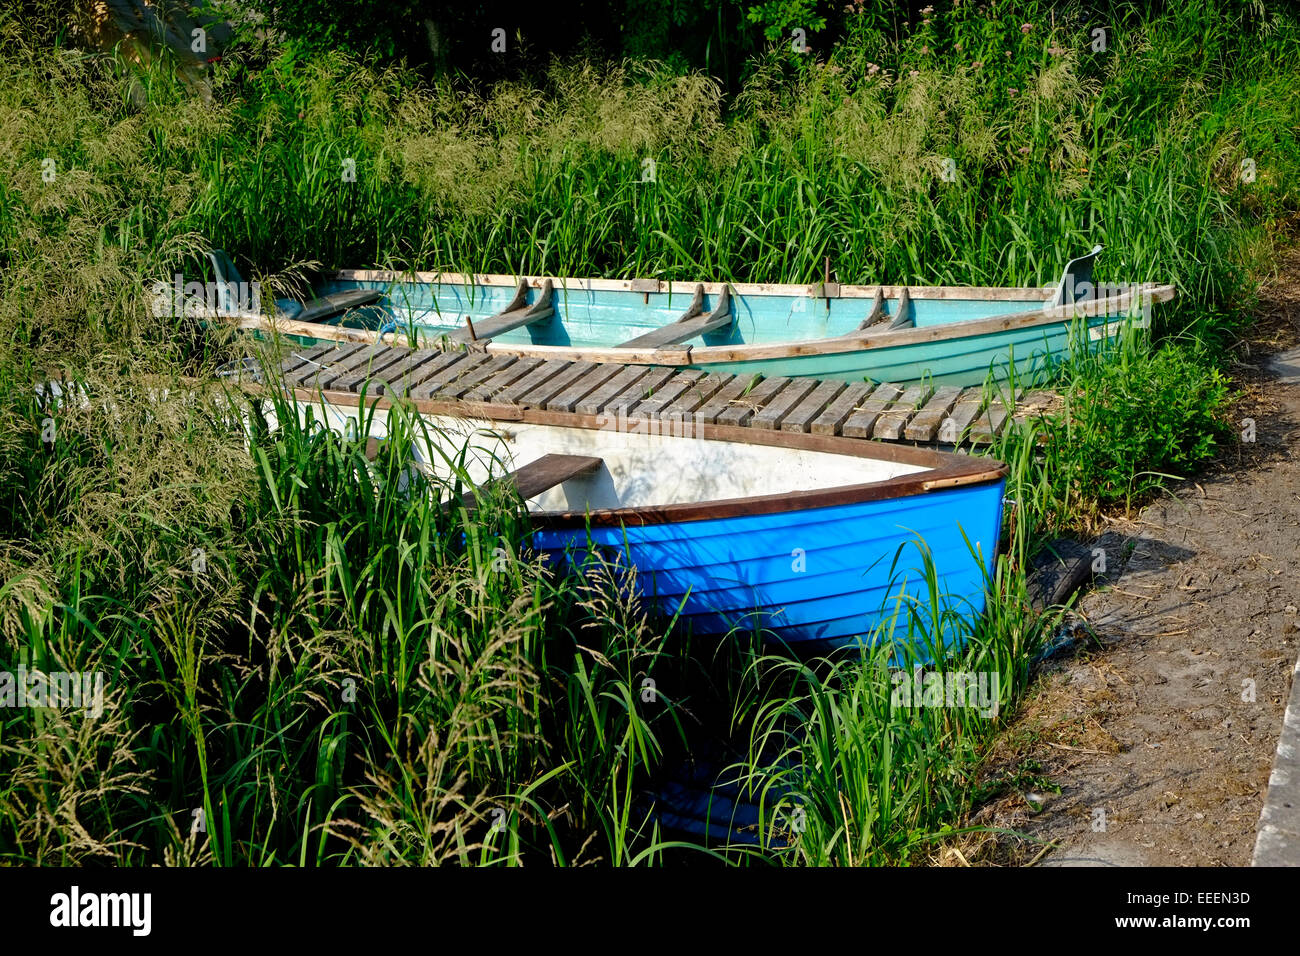 Two rowing lake boats tied up among reeds on a Lough Derg In Tipperary Ireland Stock Photo